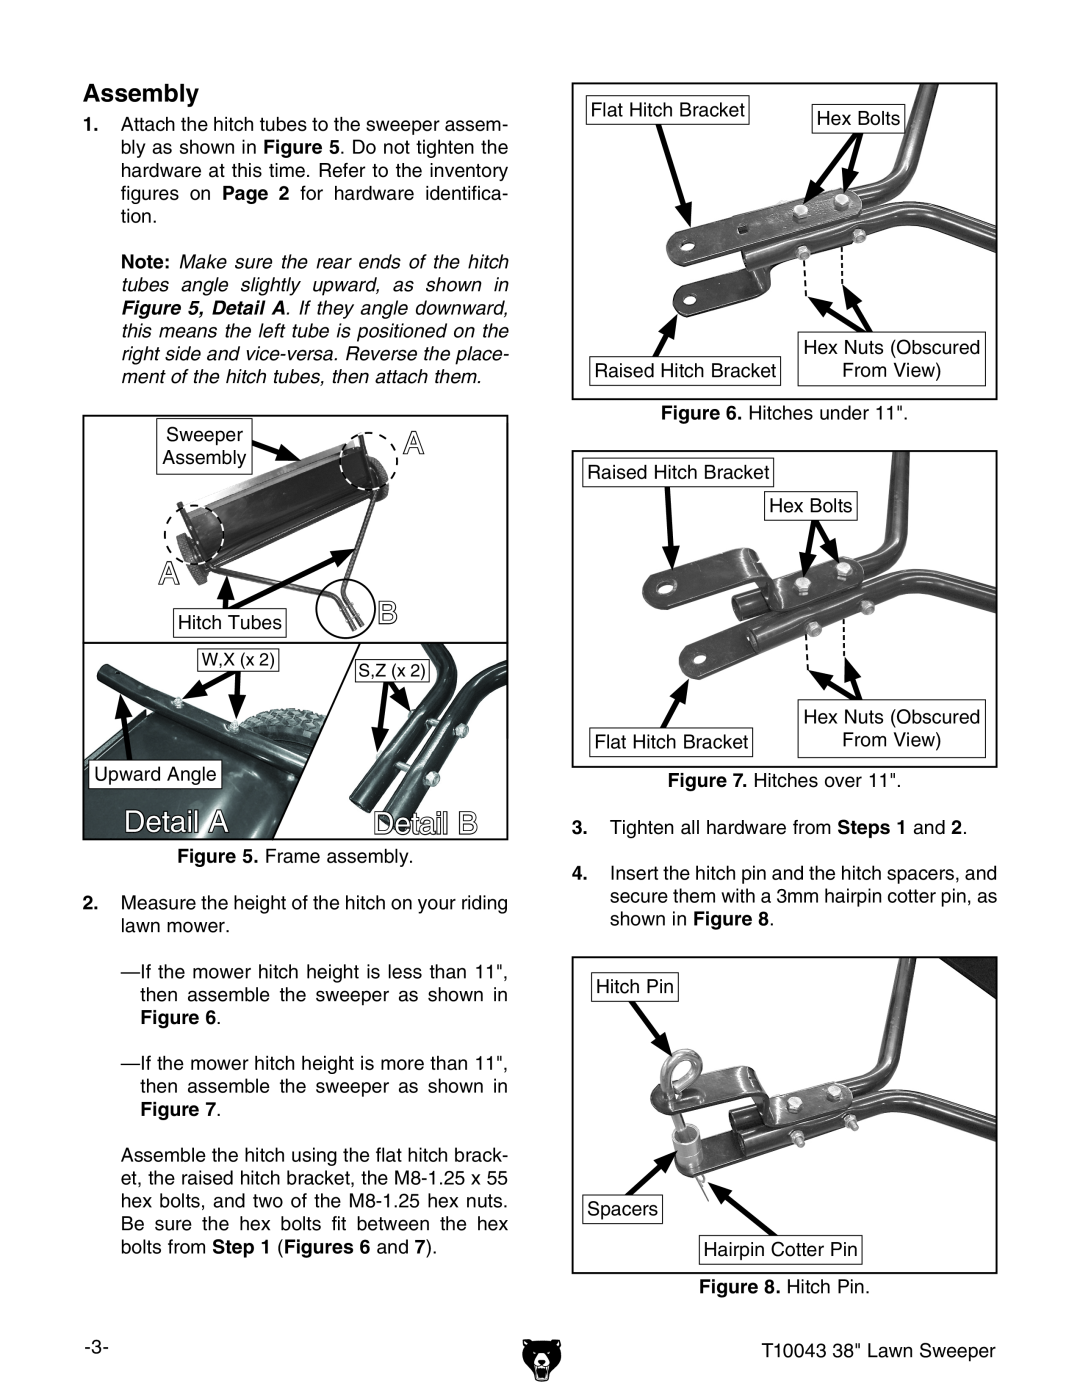 Grizzly T10043 instruction sheet Detail A, Detail B, Assembly, Hitch Tubes, Up ward Angle 